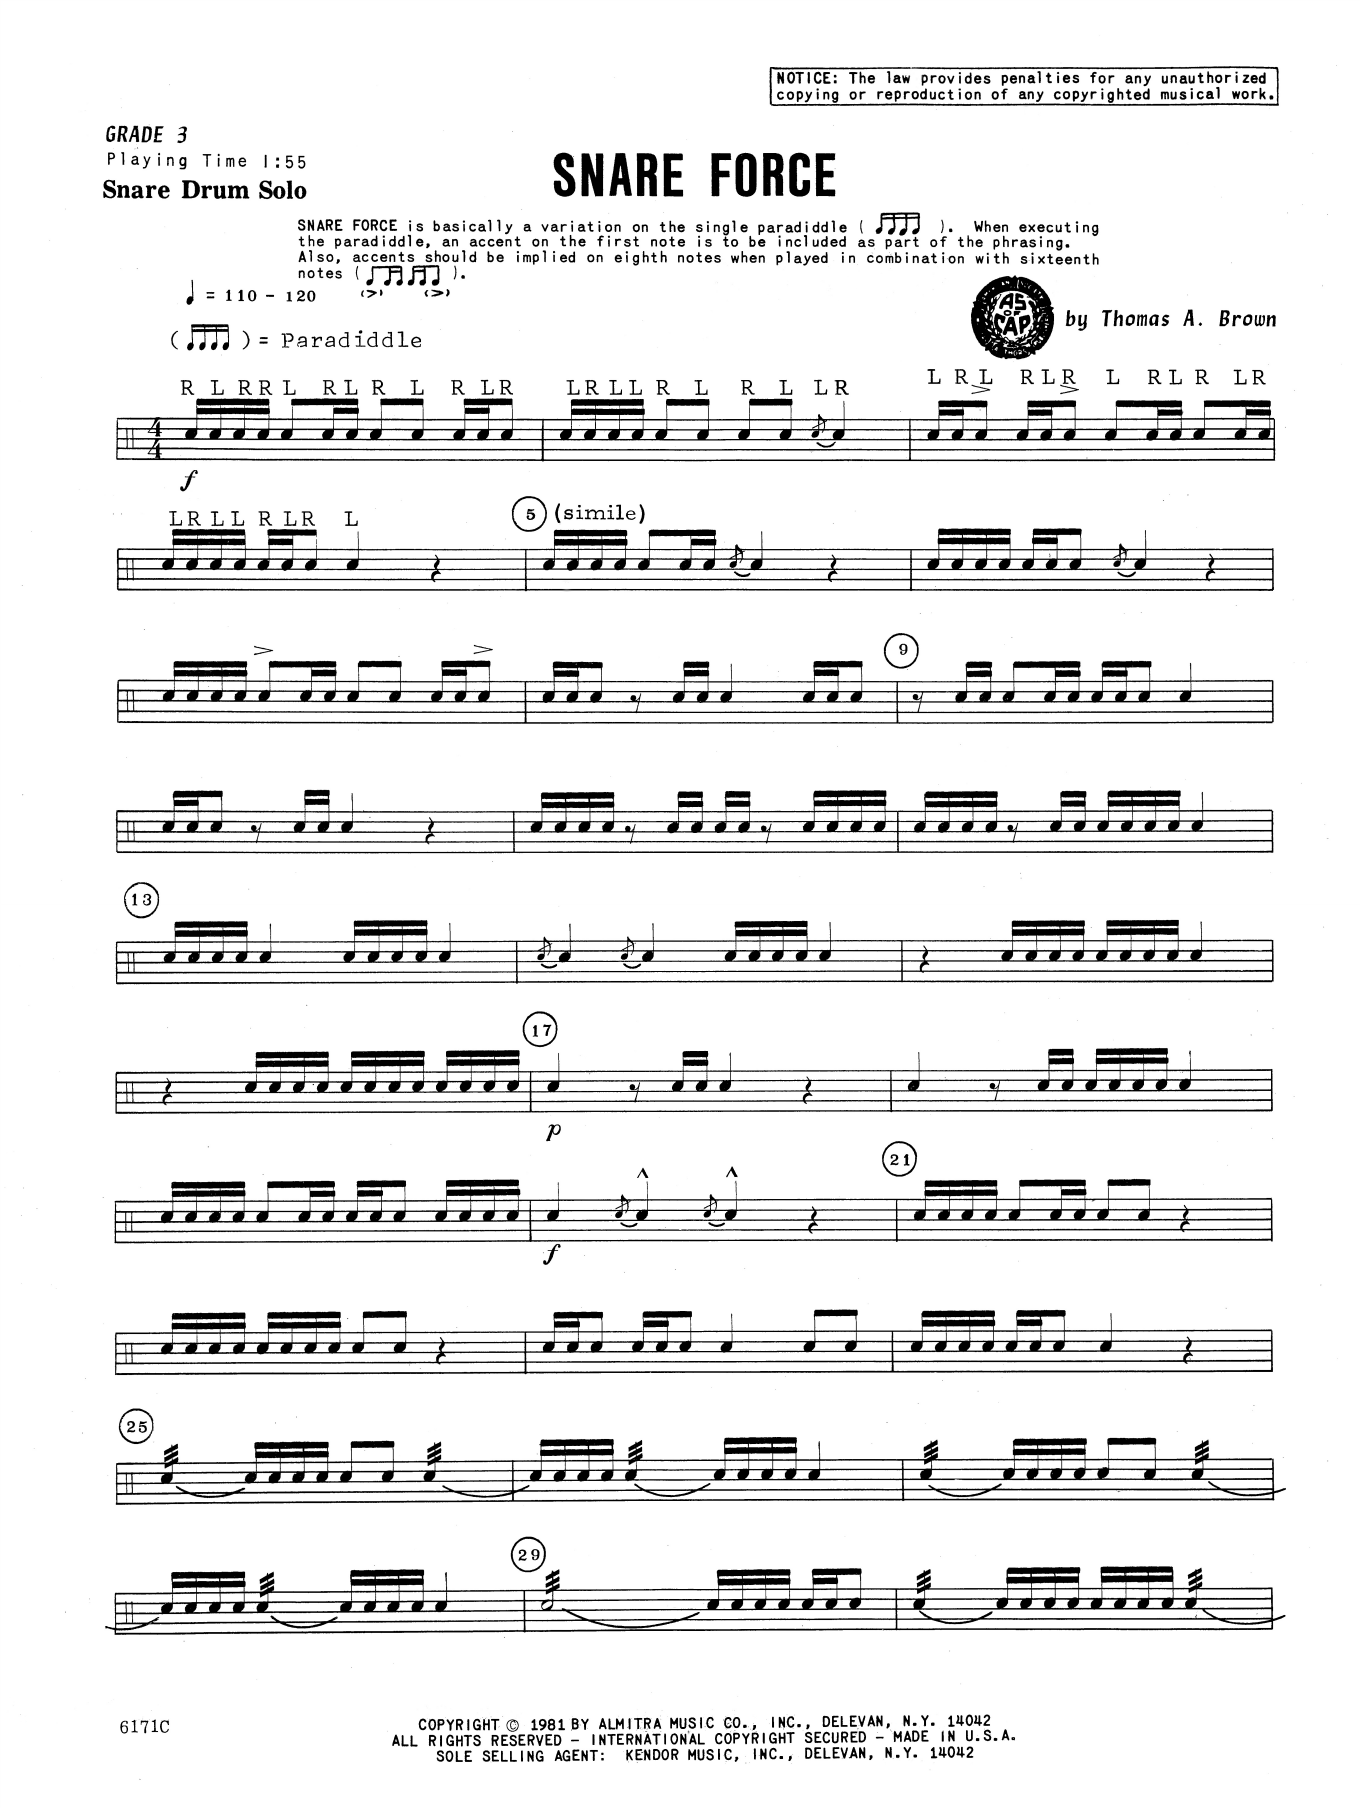 Download Tom Brown Snare Force Sheet Music